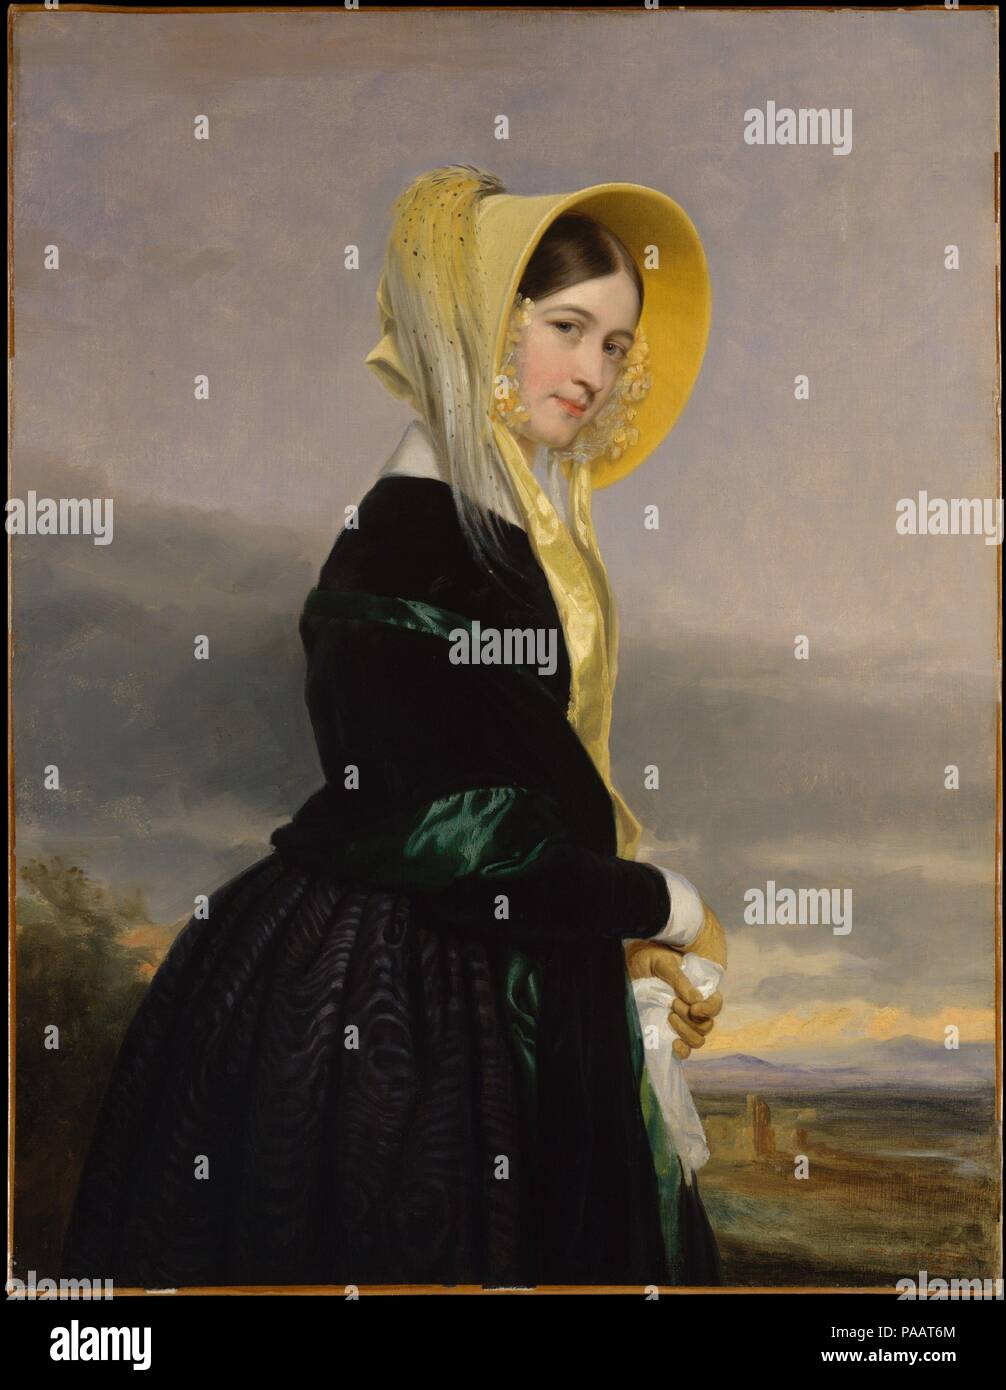 Euphemia White Van Rensselaer. Artist: George P. A. Healy (1813-1894). Dimensions: 45 3/4 x 35 1/4 in. (115.1 x 89.2 cm). Date: 1842.  Euphemia Van Rensselaer (1816-1888) was the daughter of Stephen Van  Rensselaer (see 54.51) and the sister of Alexander Van Rensselaer (see  61.70). She was born on the family manor, Rensselaerswyck, near  Albany, New York, and inherited a portion of her father's vast estate  in 1839. This picture was painted in 1842, the year before her  marriage to John Church Cruger, a prominent lawyer with whom she  settled on Cruger's Island near Barrytown, New York. Healy Stock Photo